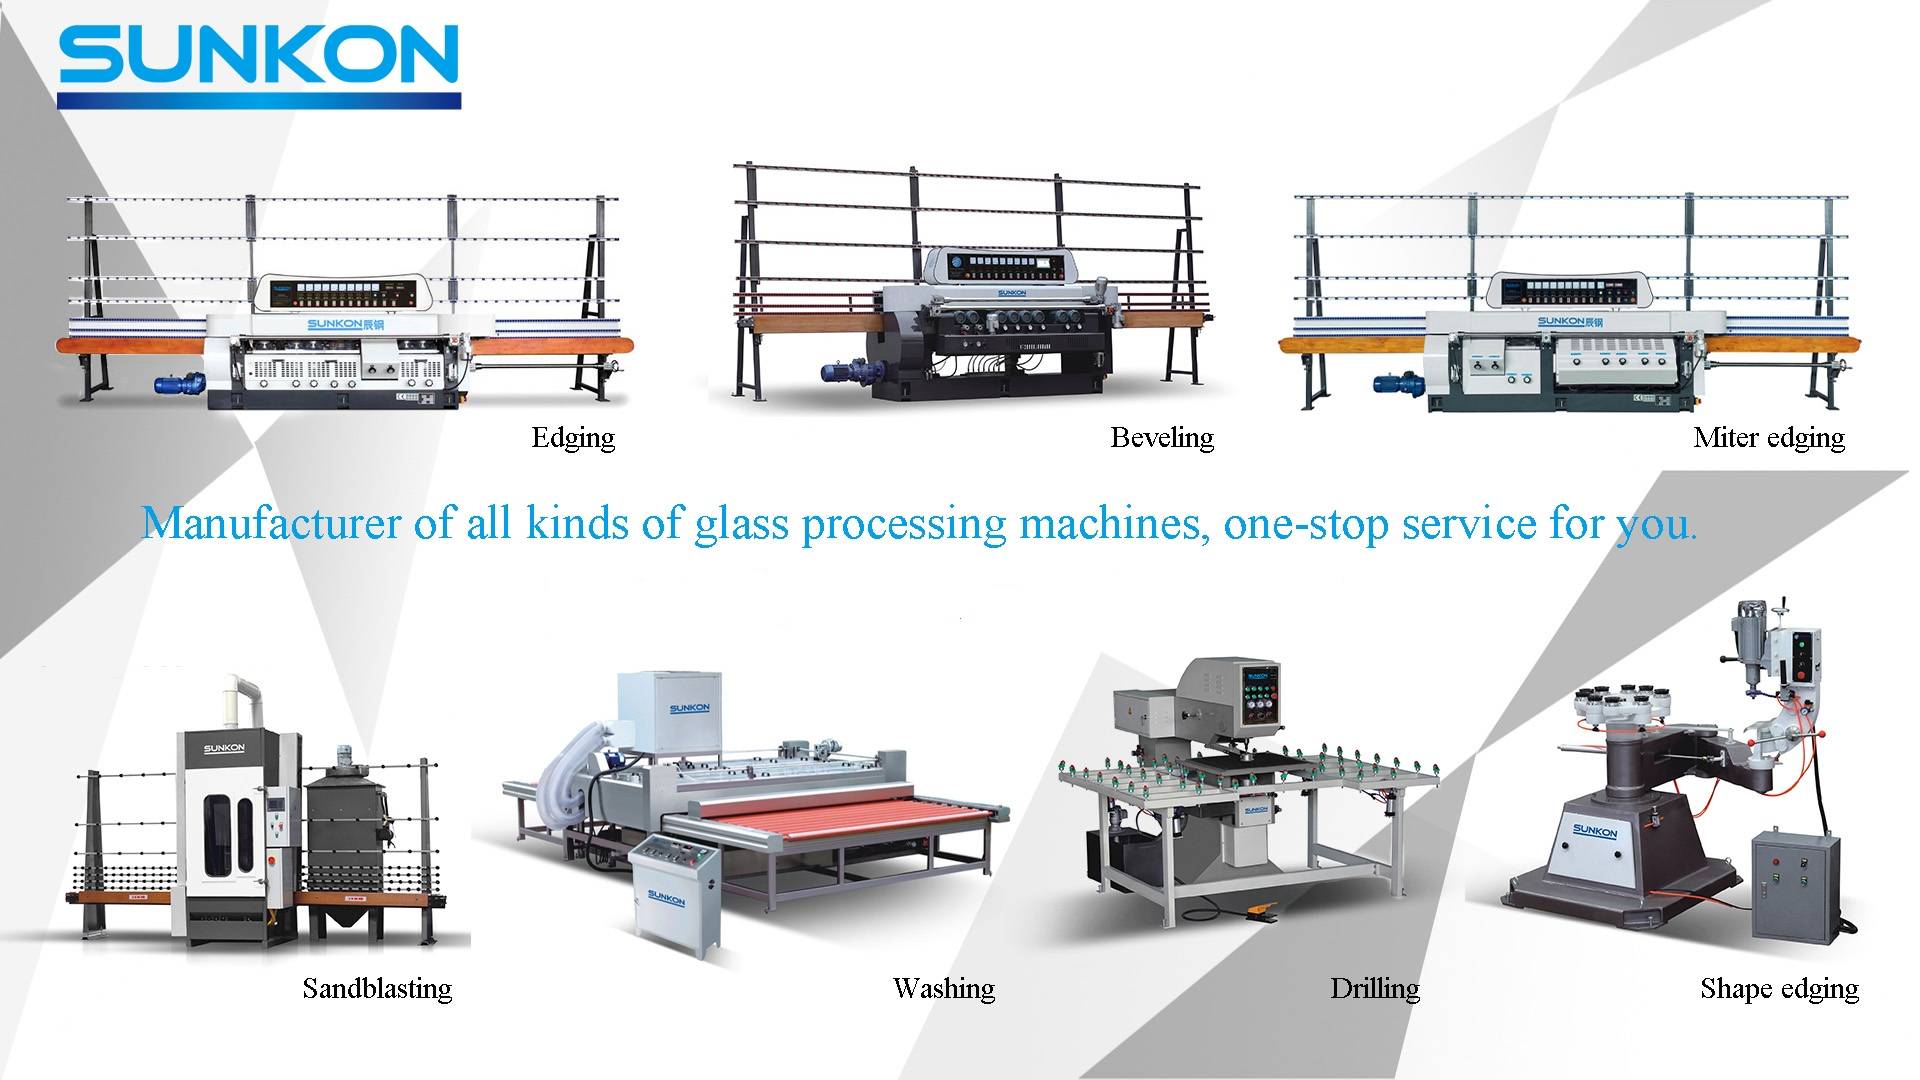 Analysis of the application of glass processing technology